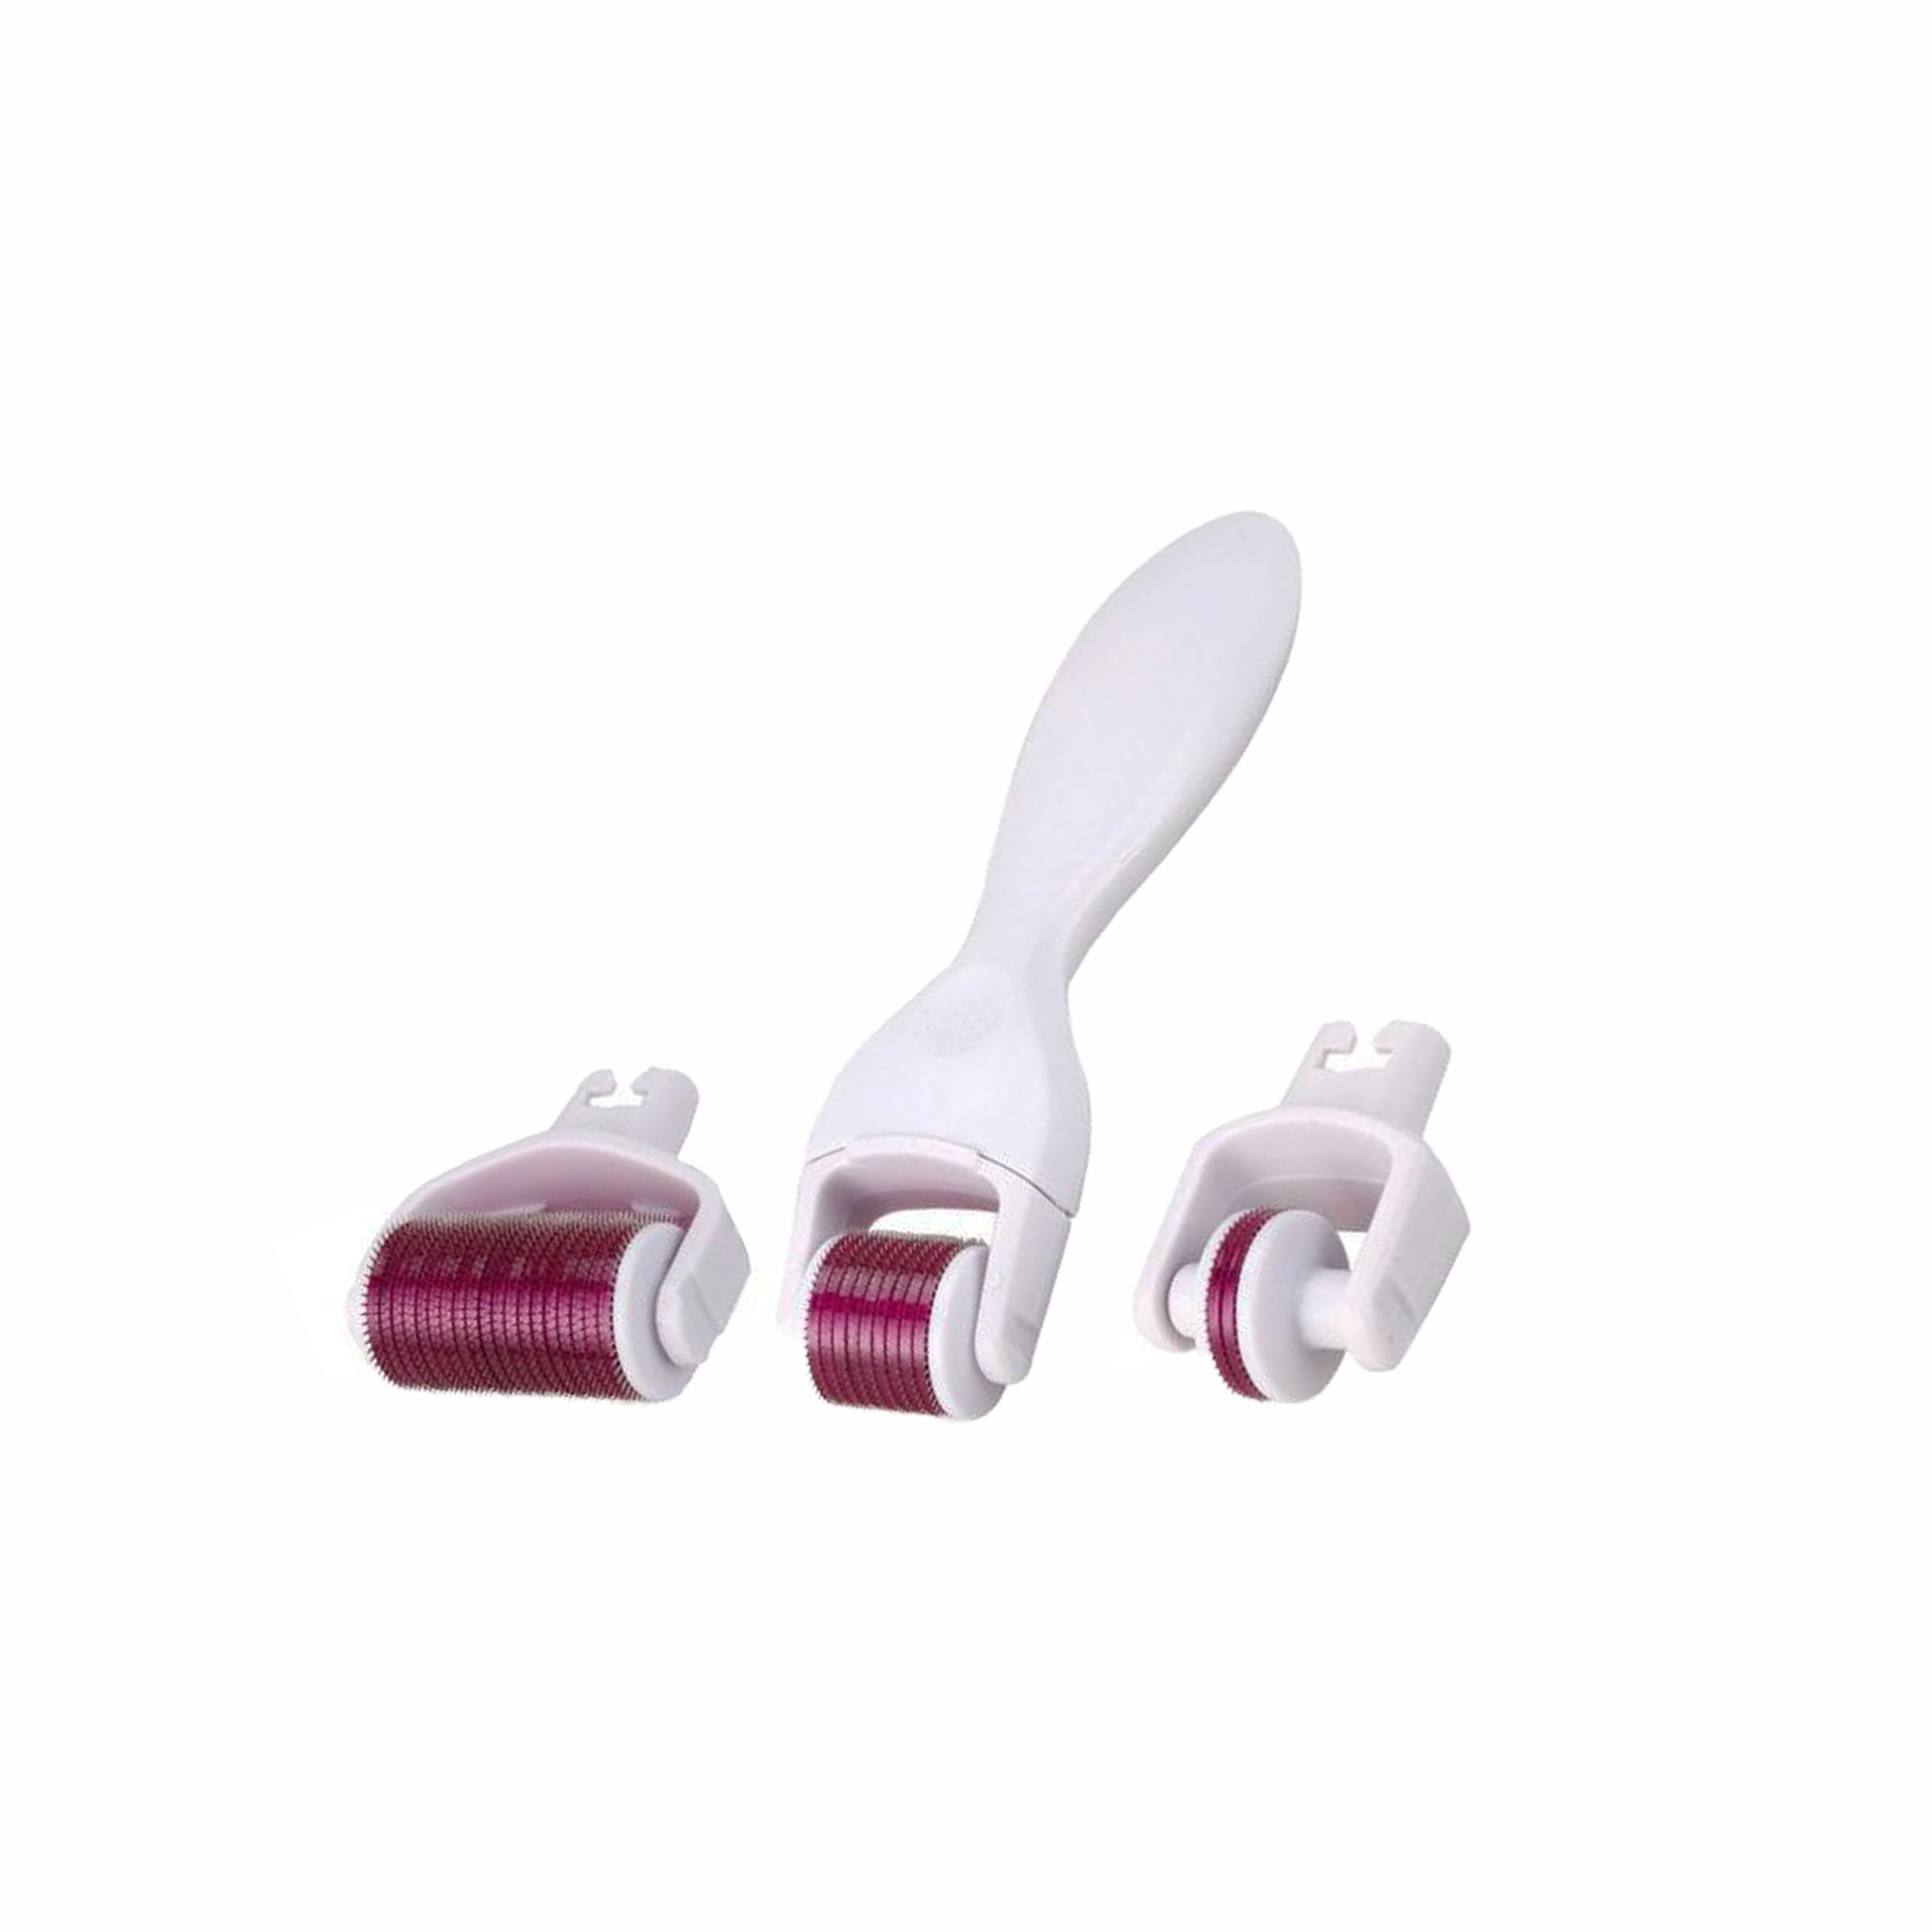 3 In 1 Derma Roller Micro Needles Therapy